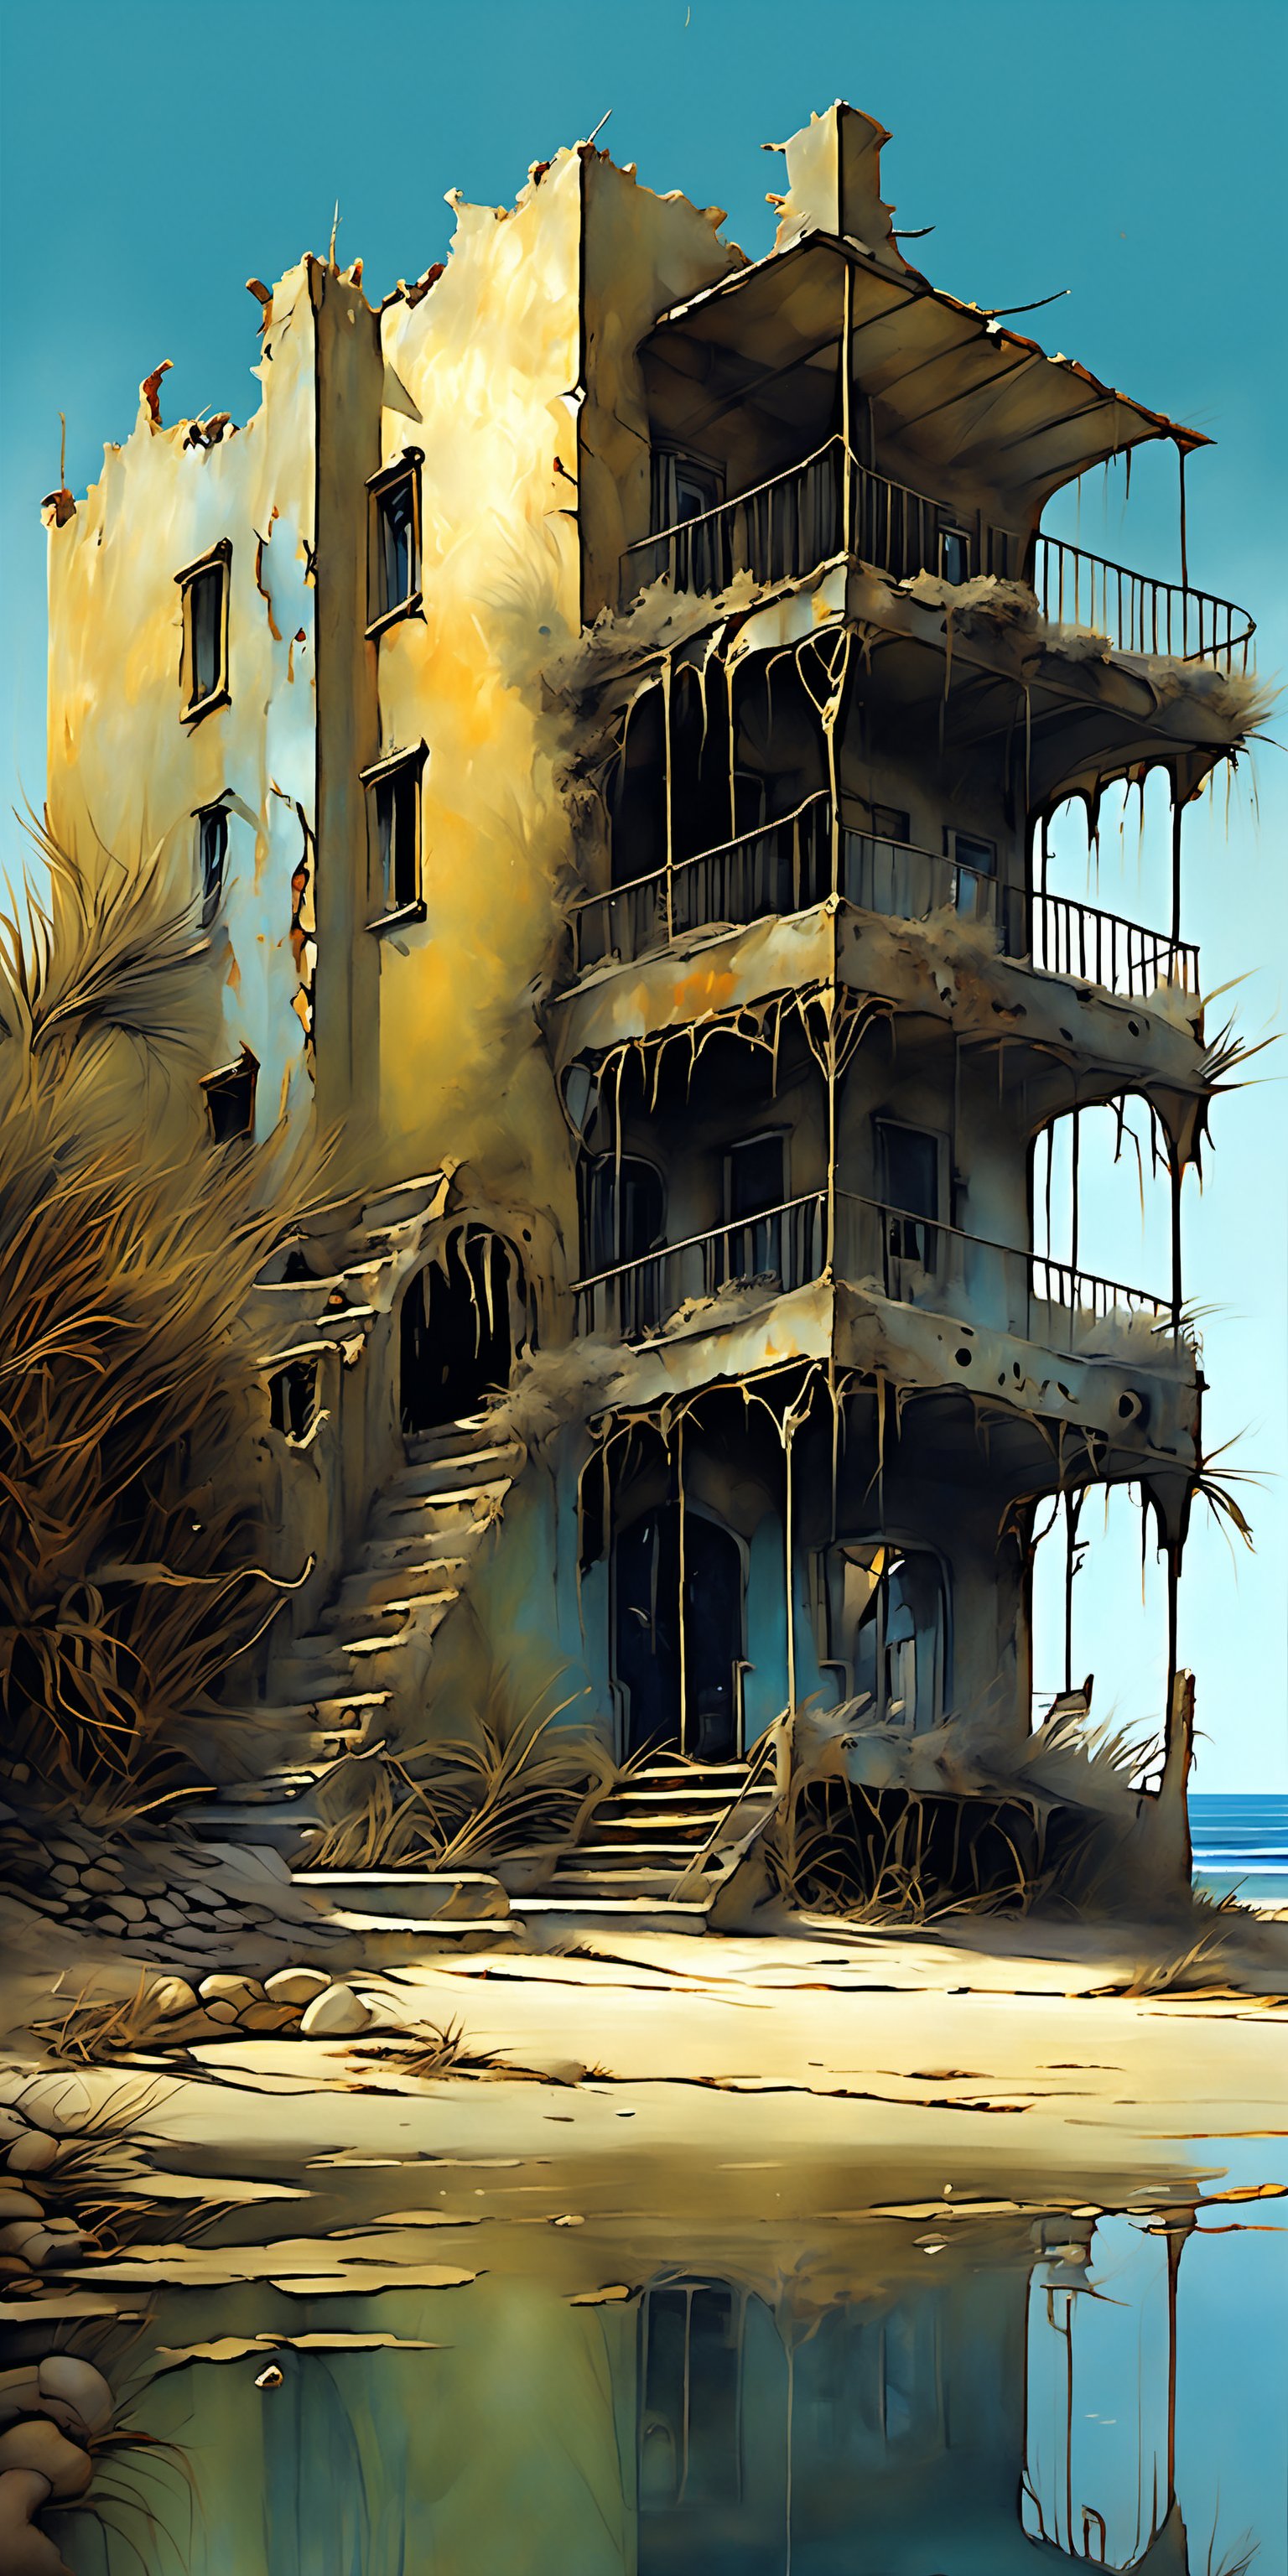 "Create a hyperrealistic painting of an abandoned luxury resort by the seaside. The overall effect is a blend of Surrealism and Realism, creating a rich, immersive setting that complements the extremely sharp focus on the decaying structures in the foreground. This resort, weathered by time and the elements, stands as a testament to the impermanence of human achievements. The scene should feature an over-sharpened focus on the crumbling walls, rusted railings, and cracked pool tiles, highlighting the peeling paint, broken windows, and overgrown plants with exaggerated clarity and detail. The lighting should come from the midday sun, casting a bright, stark light that creates dramatic shadows over the scene. In stark contrast, the background should also be in extreme sharp focus, featuring the tranquil sea, distant city skyline, and clear sky with detailed textures, creating a juxtaposition of the decayed resort against the serene and vibrant seaside setting. The atmosphere should be nostalgic and slightly eerie, with all elements rendered in precise, hyper-detailed realism. The colors in the background should include shades of turquoise, deep blue, and sandy beige with dramatic contrasts, featuring warm golden highlights and soft greens, blending seamlessly with muted browns. Use this blend of cool and warm colors to emphasize the haunting beauty of the scene. The overall scene should evoke a sense of melancholy and reflection, capturing the stark contrast between the decayed luxury and the enduring natural beauty of the seaside landscape, with every detail intentionally over-sharpened to enhance the sense of depth and realism."